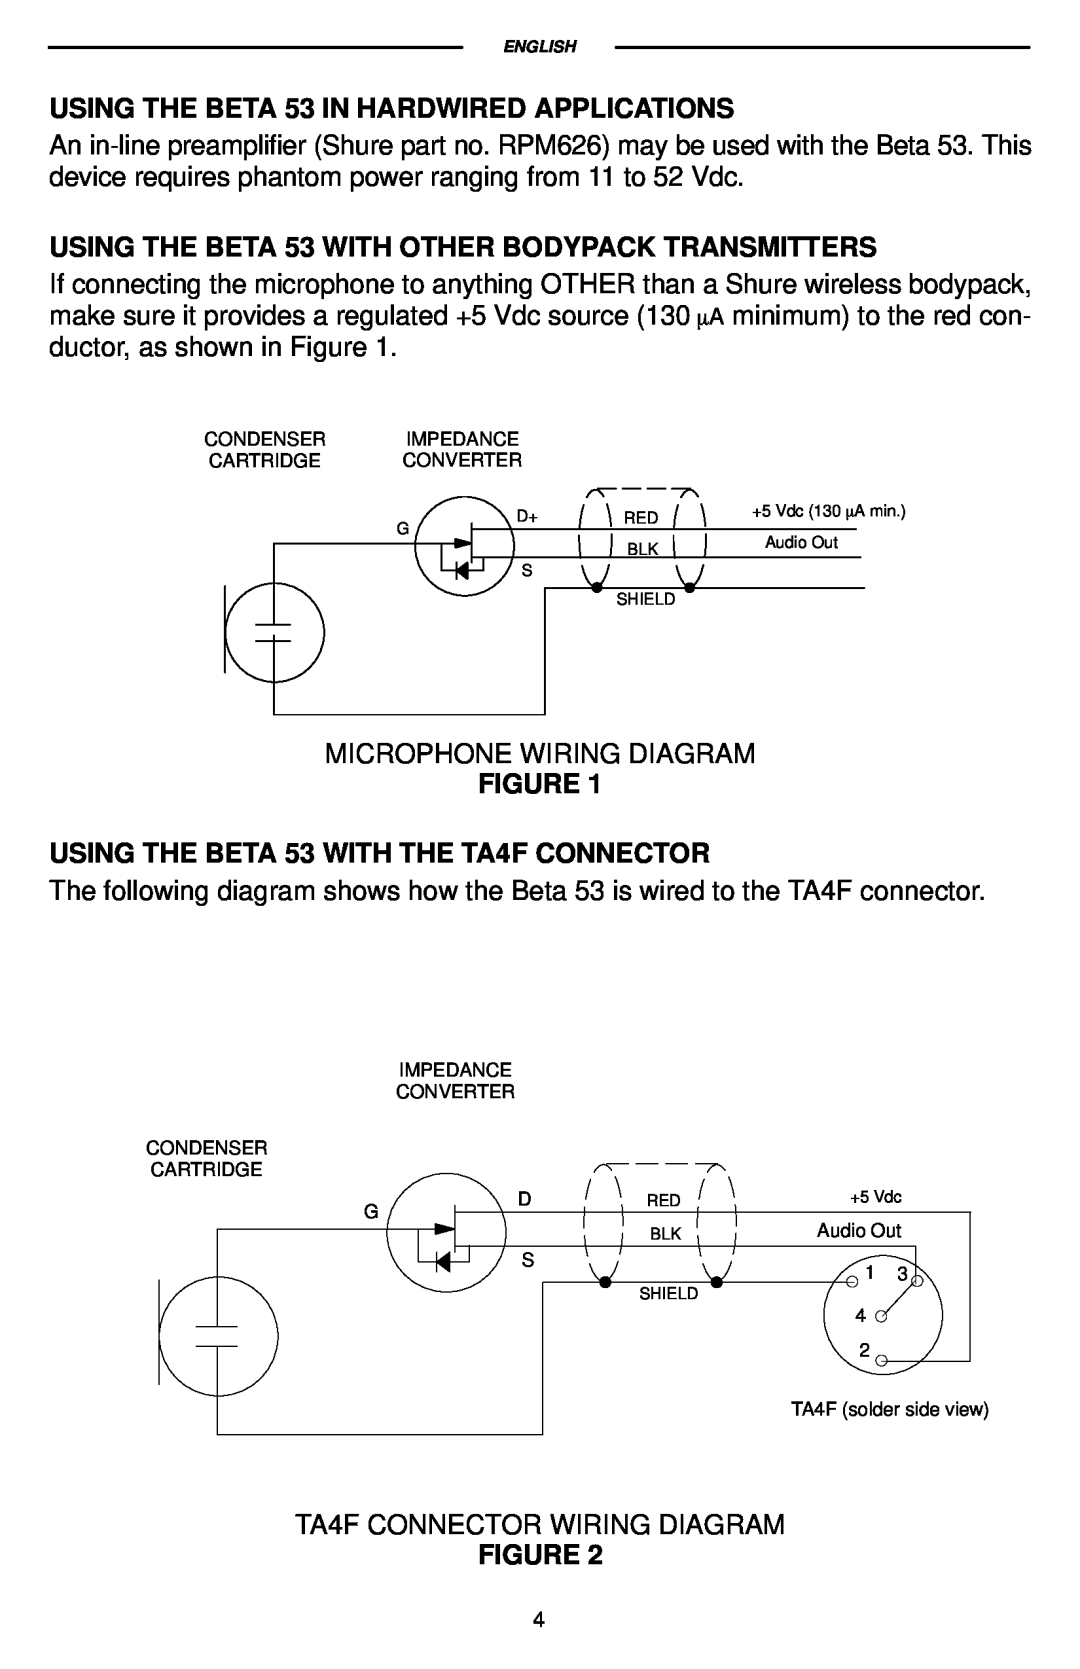 Shure 27C3115 manual USING THE BETA 53 IN HARDWIRED APPLICATIONS, FIGURE USING THE BETA 53 WITH THE TA4F CONNECTOR 